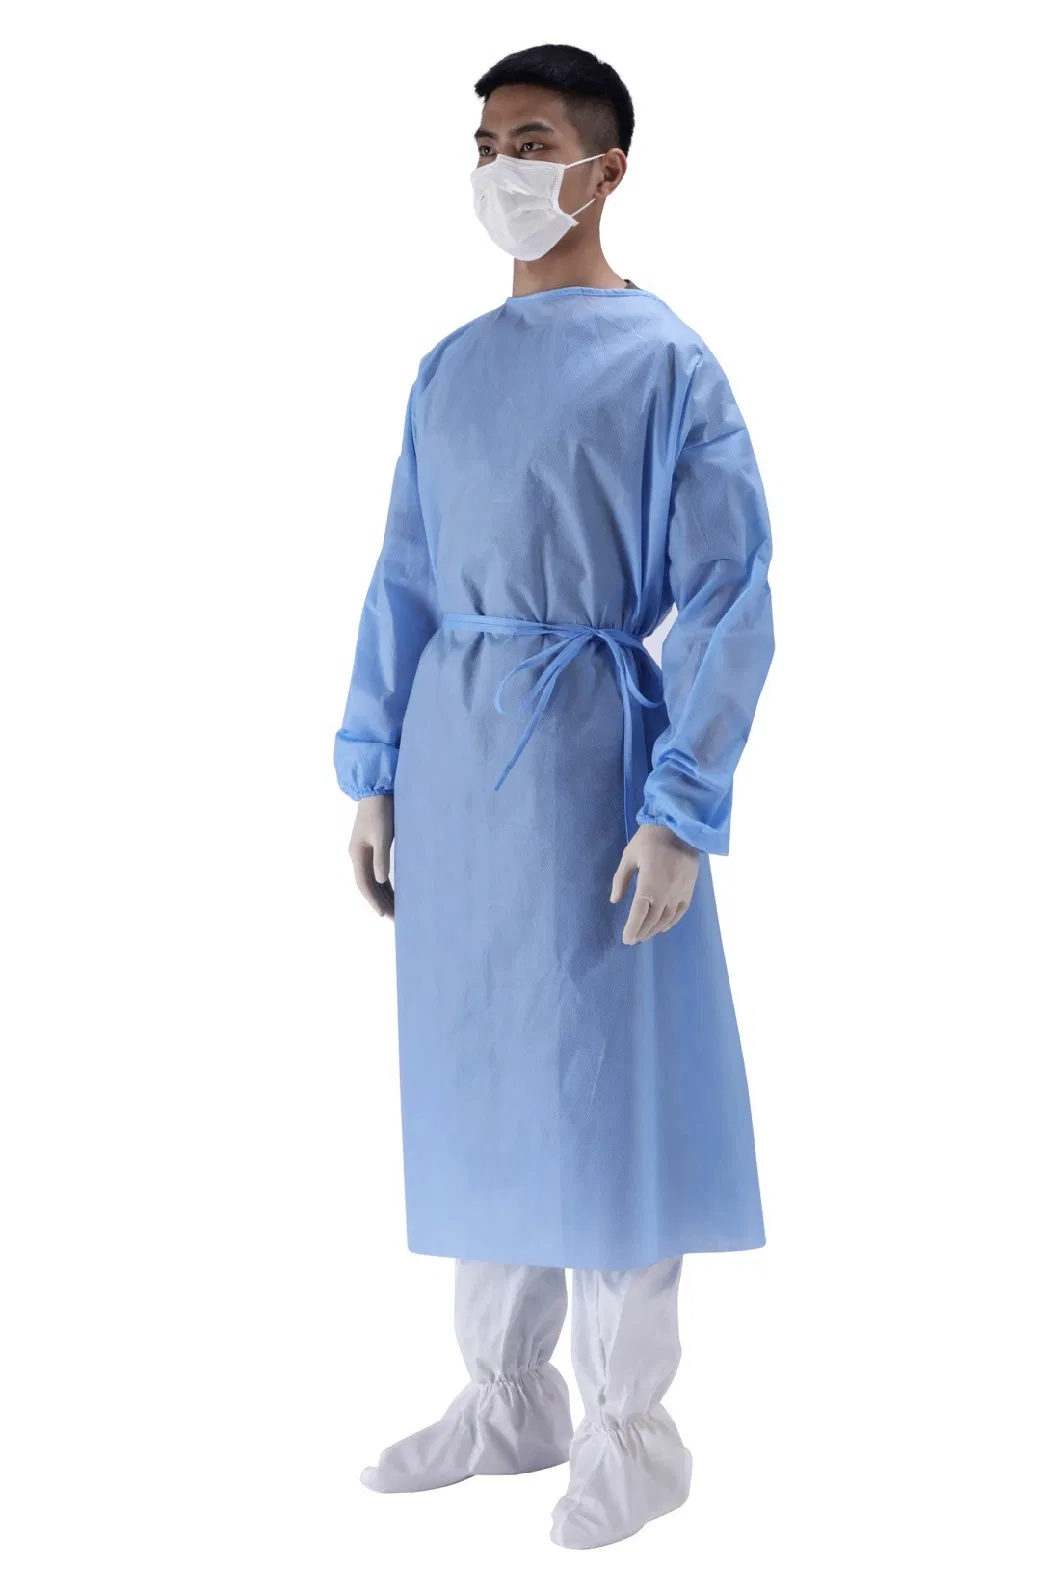 Medical Supplies Eo Sterile Disposable SMS Surgical Medical Gown